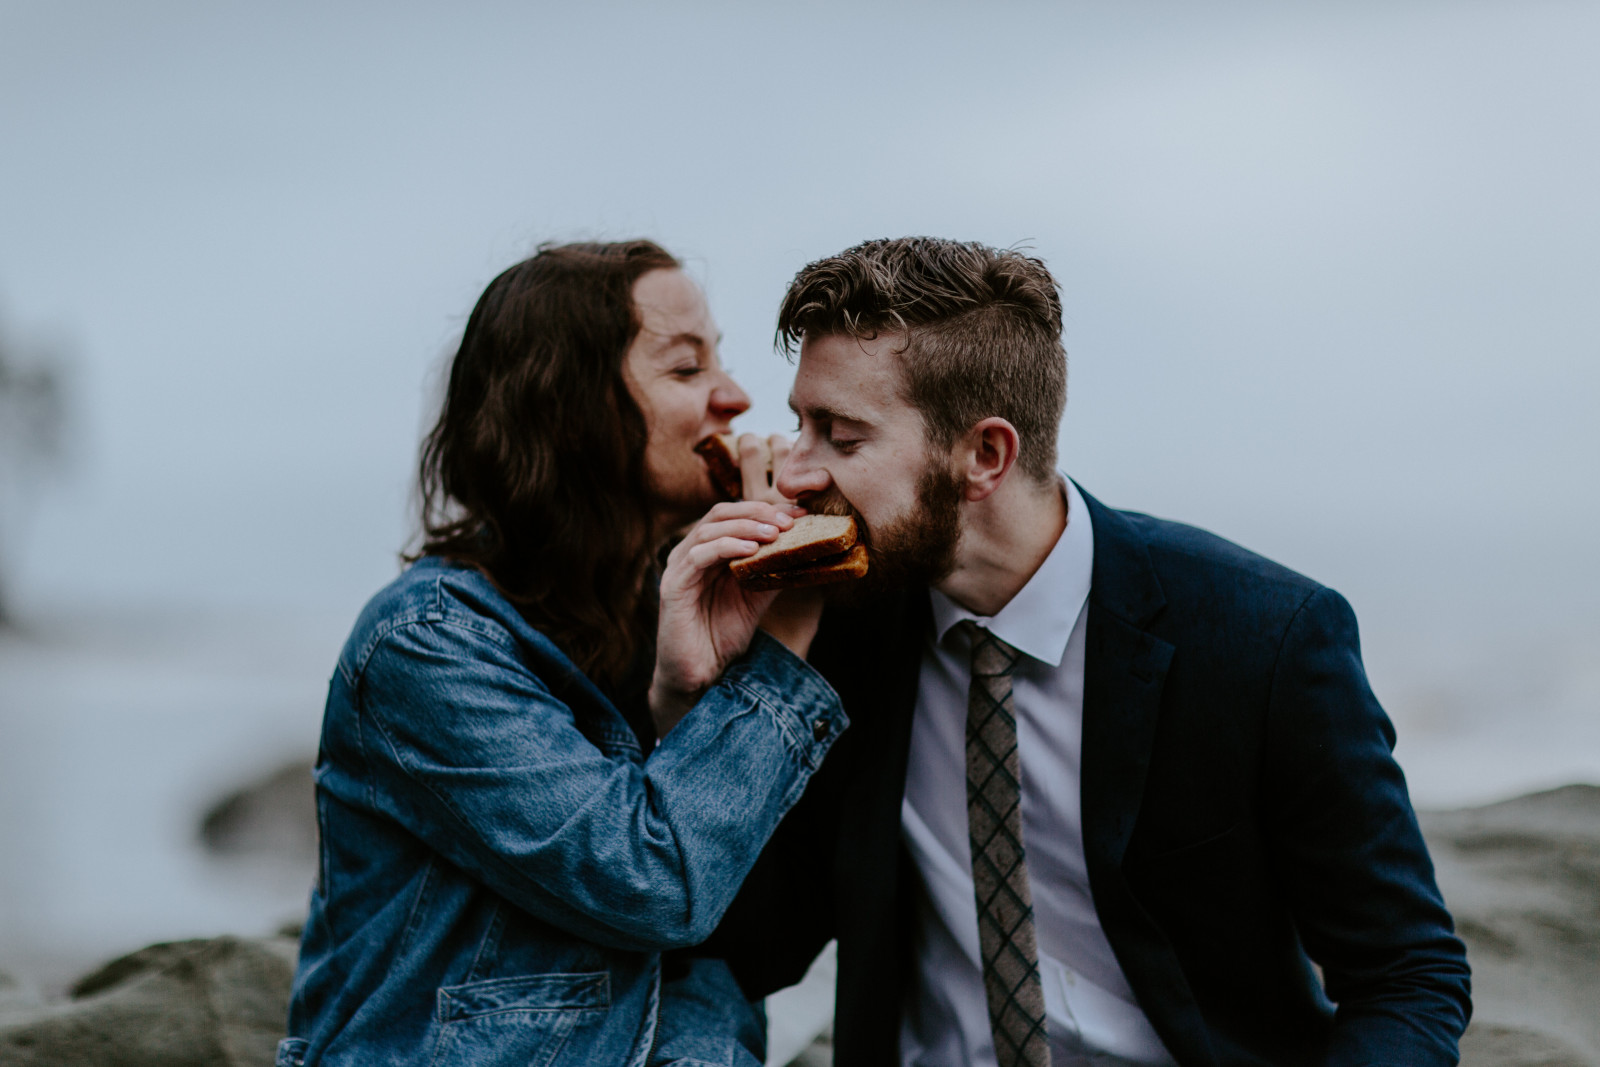 Mollie and Corey share a peanut butter sandwich toast. Elopement photography at Olympic National Park by Sienna Plus Josh.